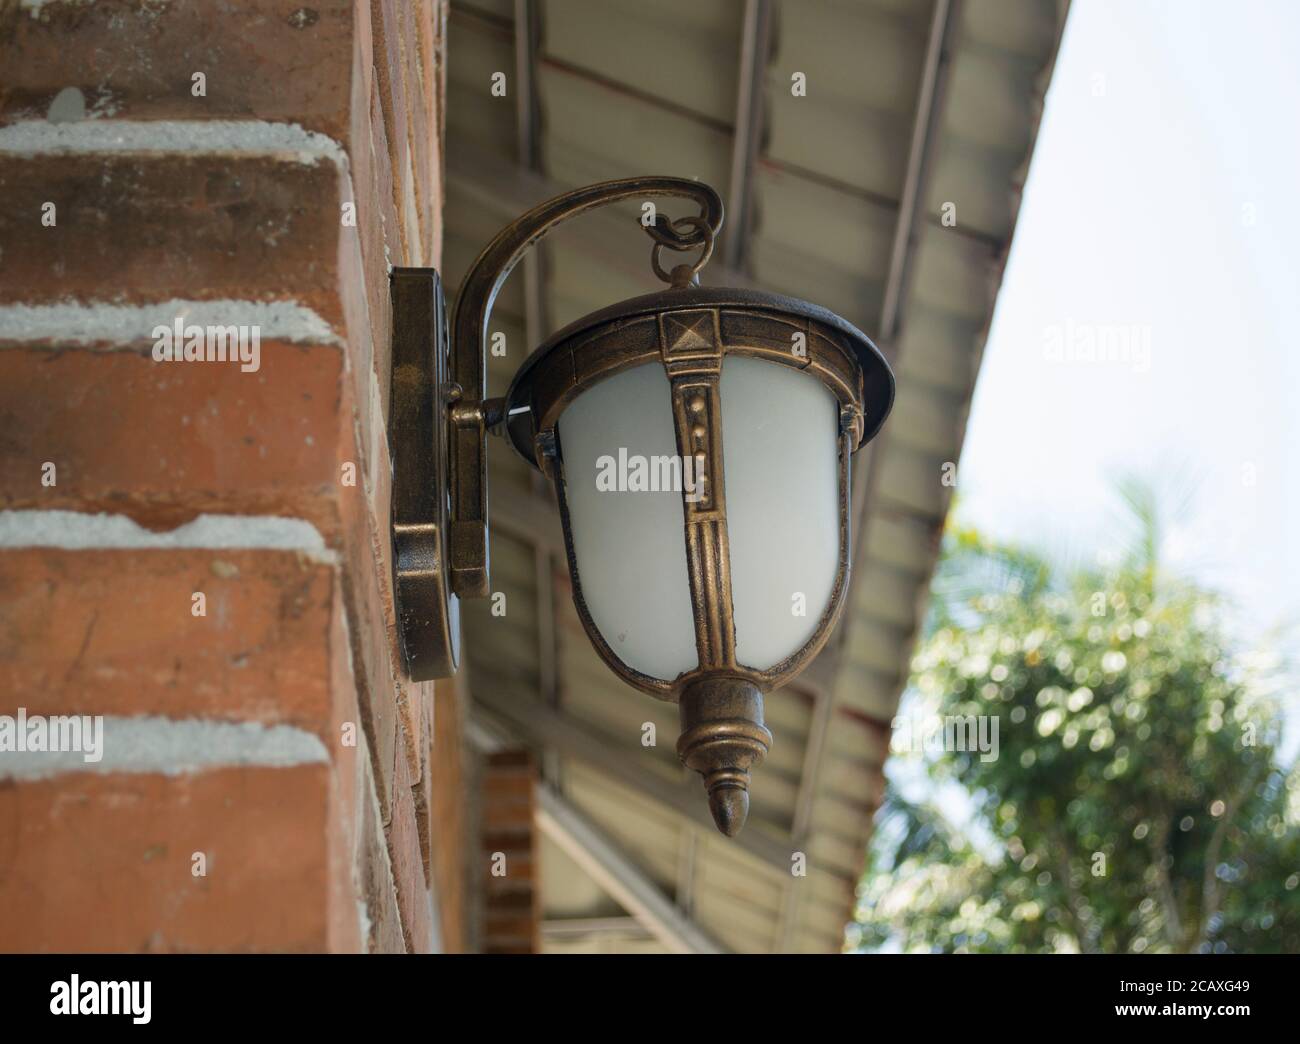 Side Angle View Of The Classic Modern Decorative Lamp Is Mounted On The Outdoor Brick Wall Stock Photo